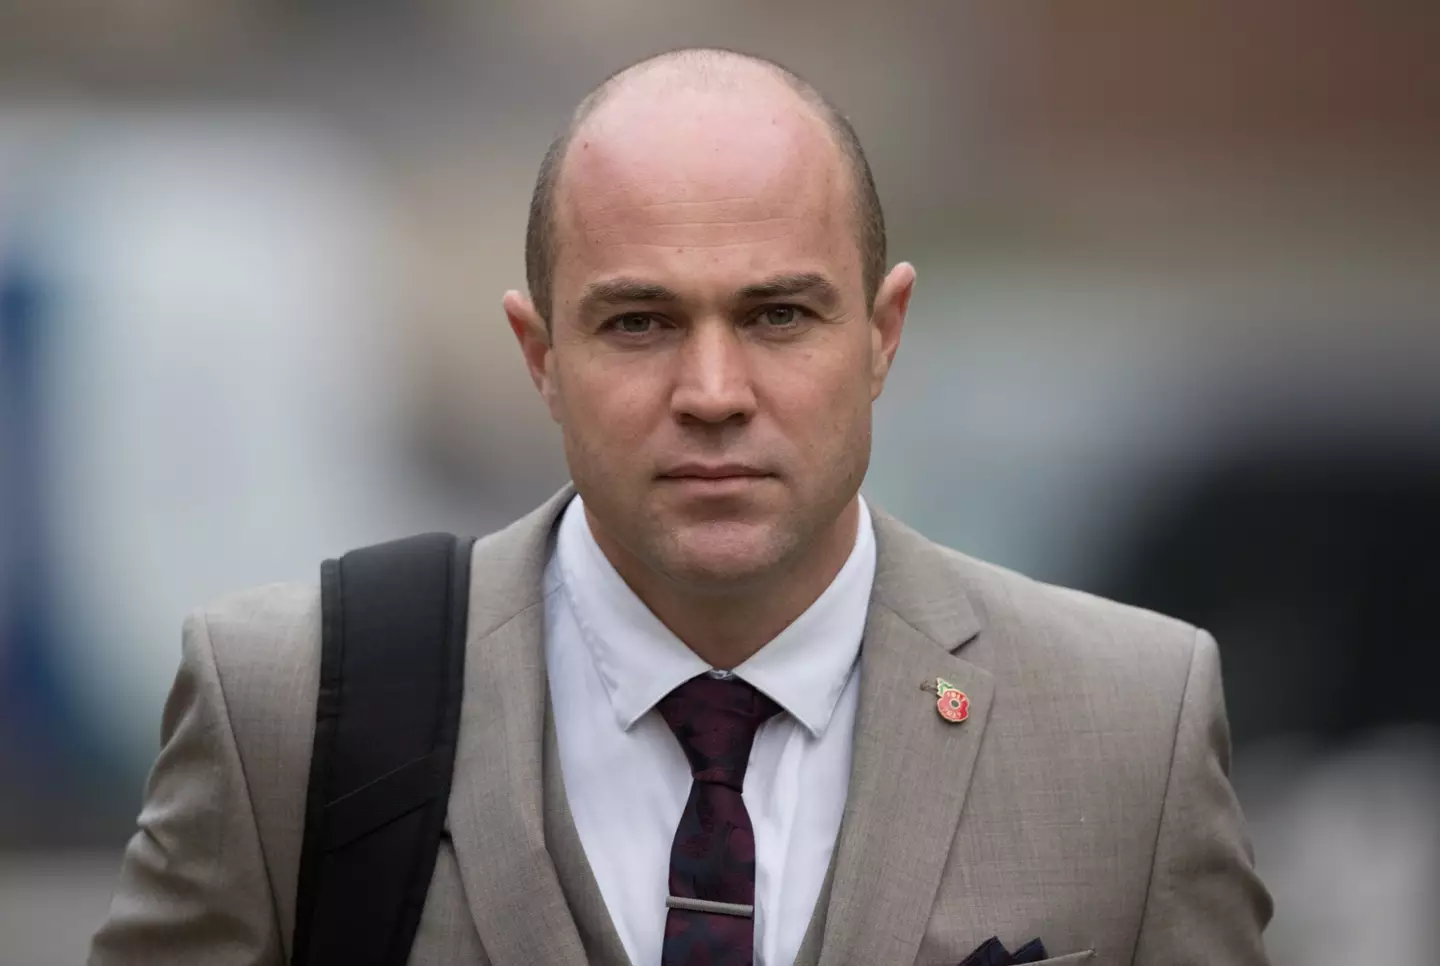 Emile Cilliers arrives at court for his trial in 2017. (Matt Cardy/Getty Images)